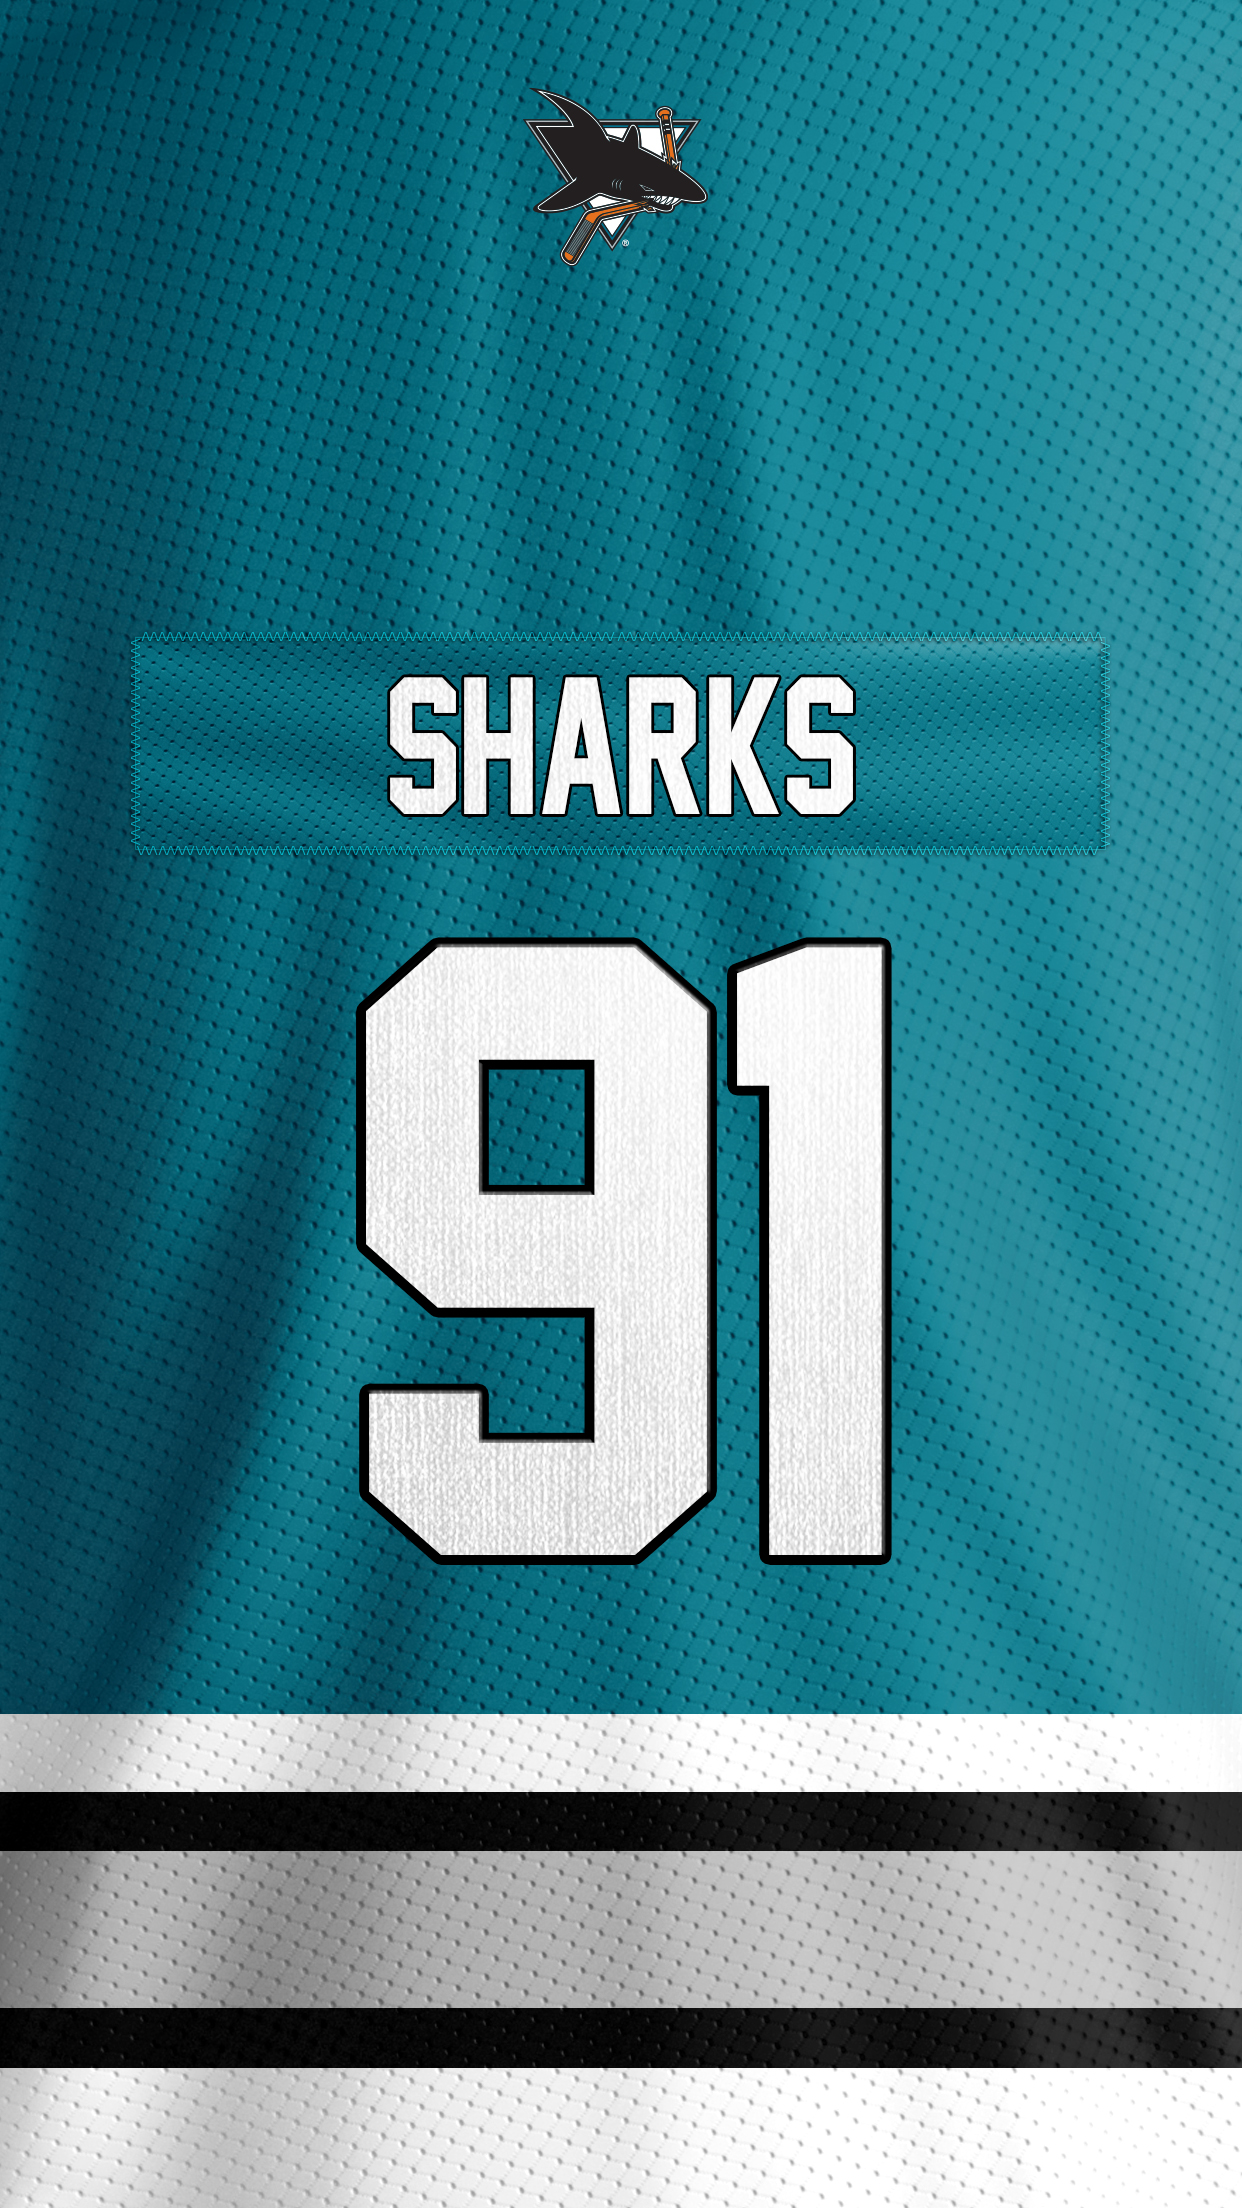 San Jose Sharks We Re So Nice We Re Doing Custom Wallpapers Twice Until 3pm Reply With Your Name 10 Character Limit Number 2 Character Limit For A 𝙘𝙝𝙖𝙣𝙘𝙚 To